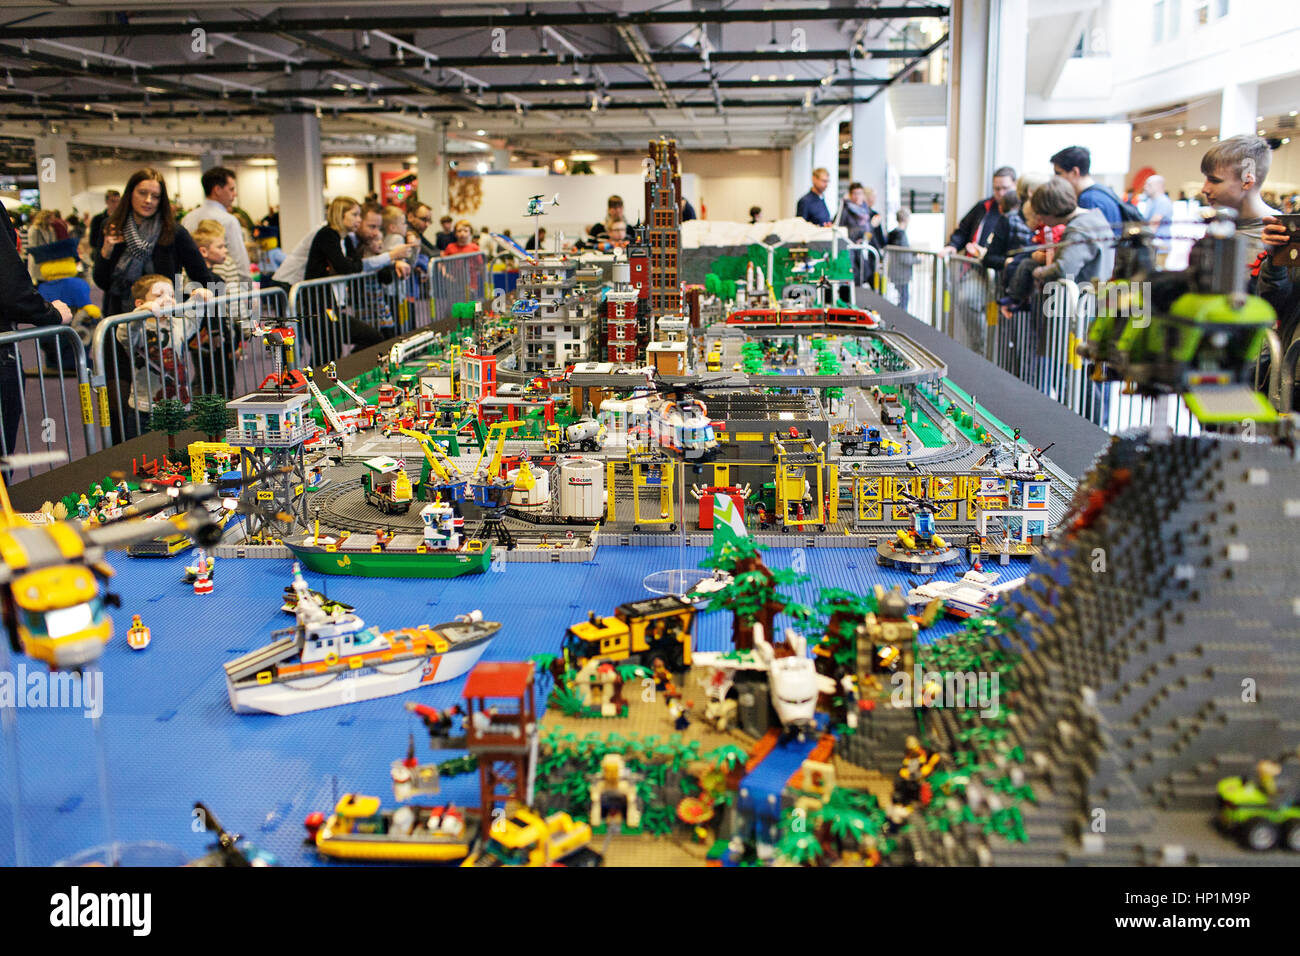 Copenhagen, 17th Feb, 2017. Children and adults of all ages go crazy at annual LEGO World event in Bella Center Copenhagen. The LEGO Group is the largest toy company by